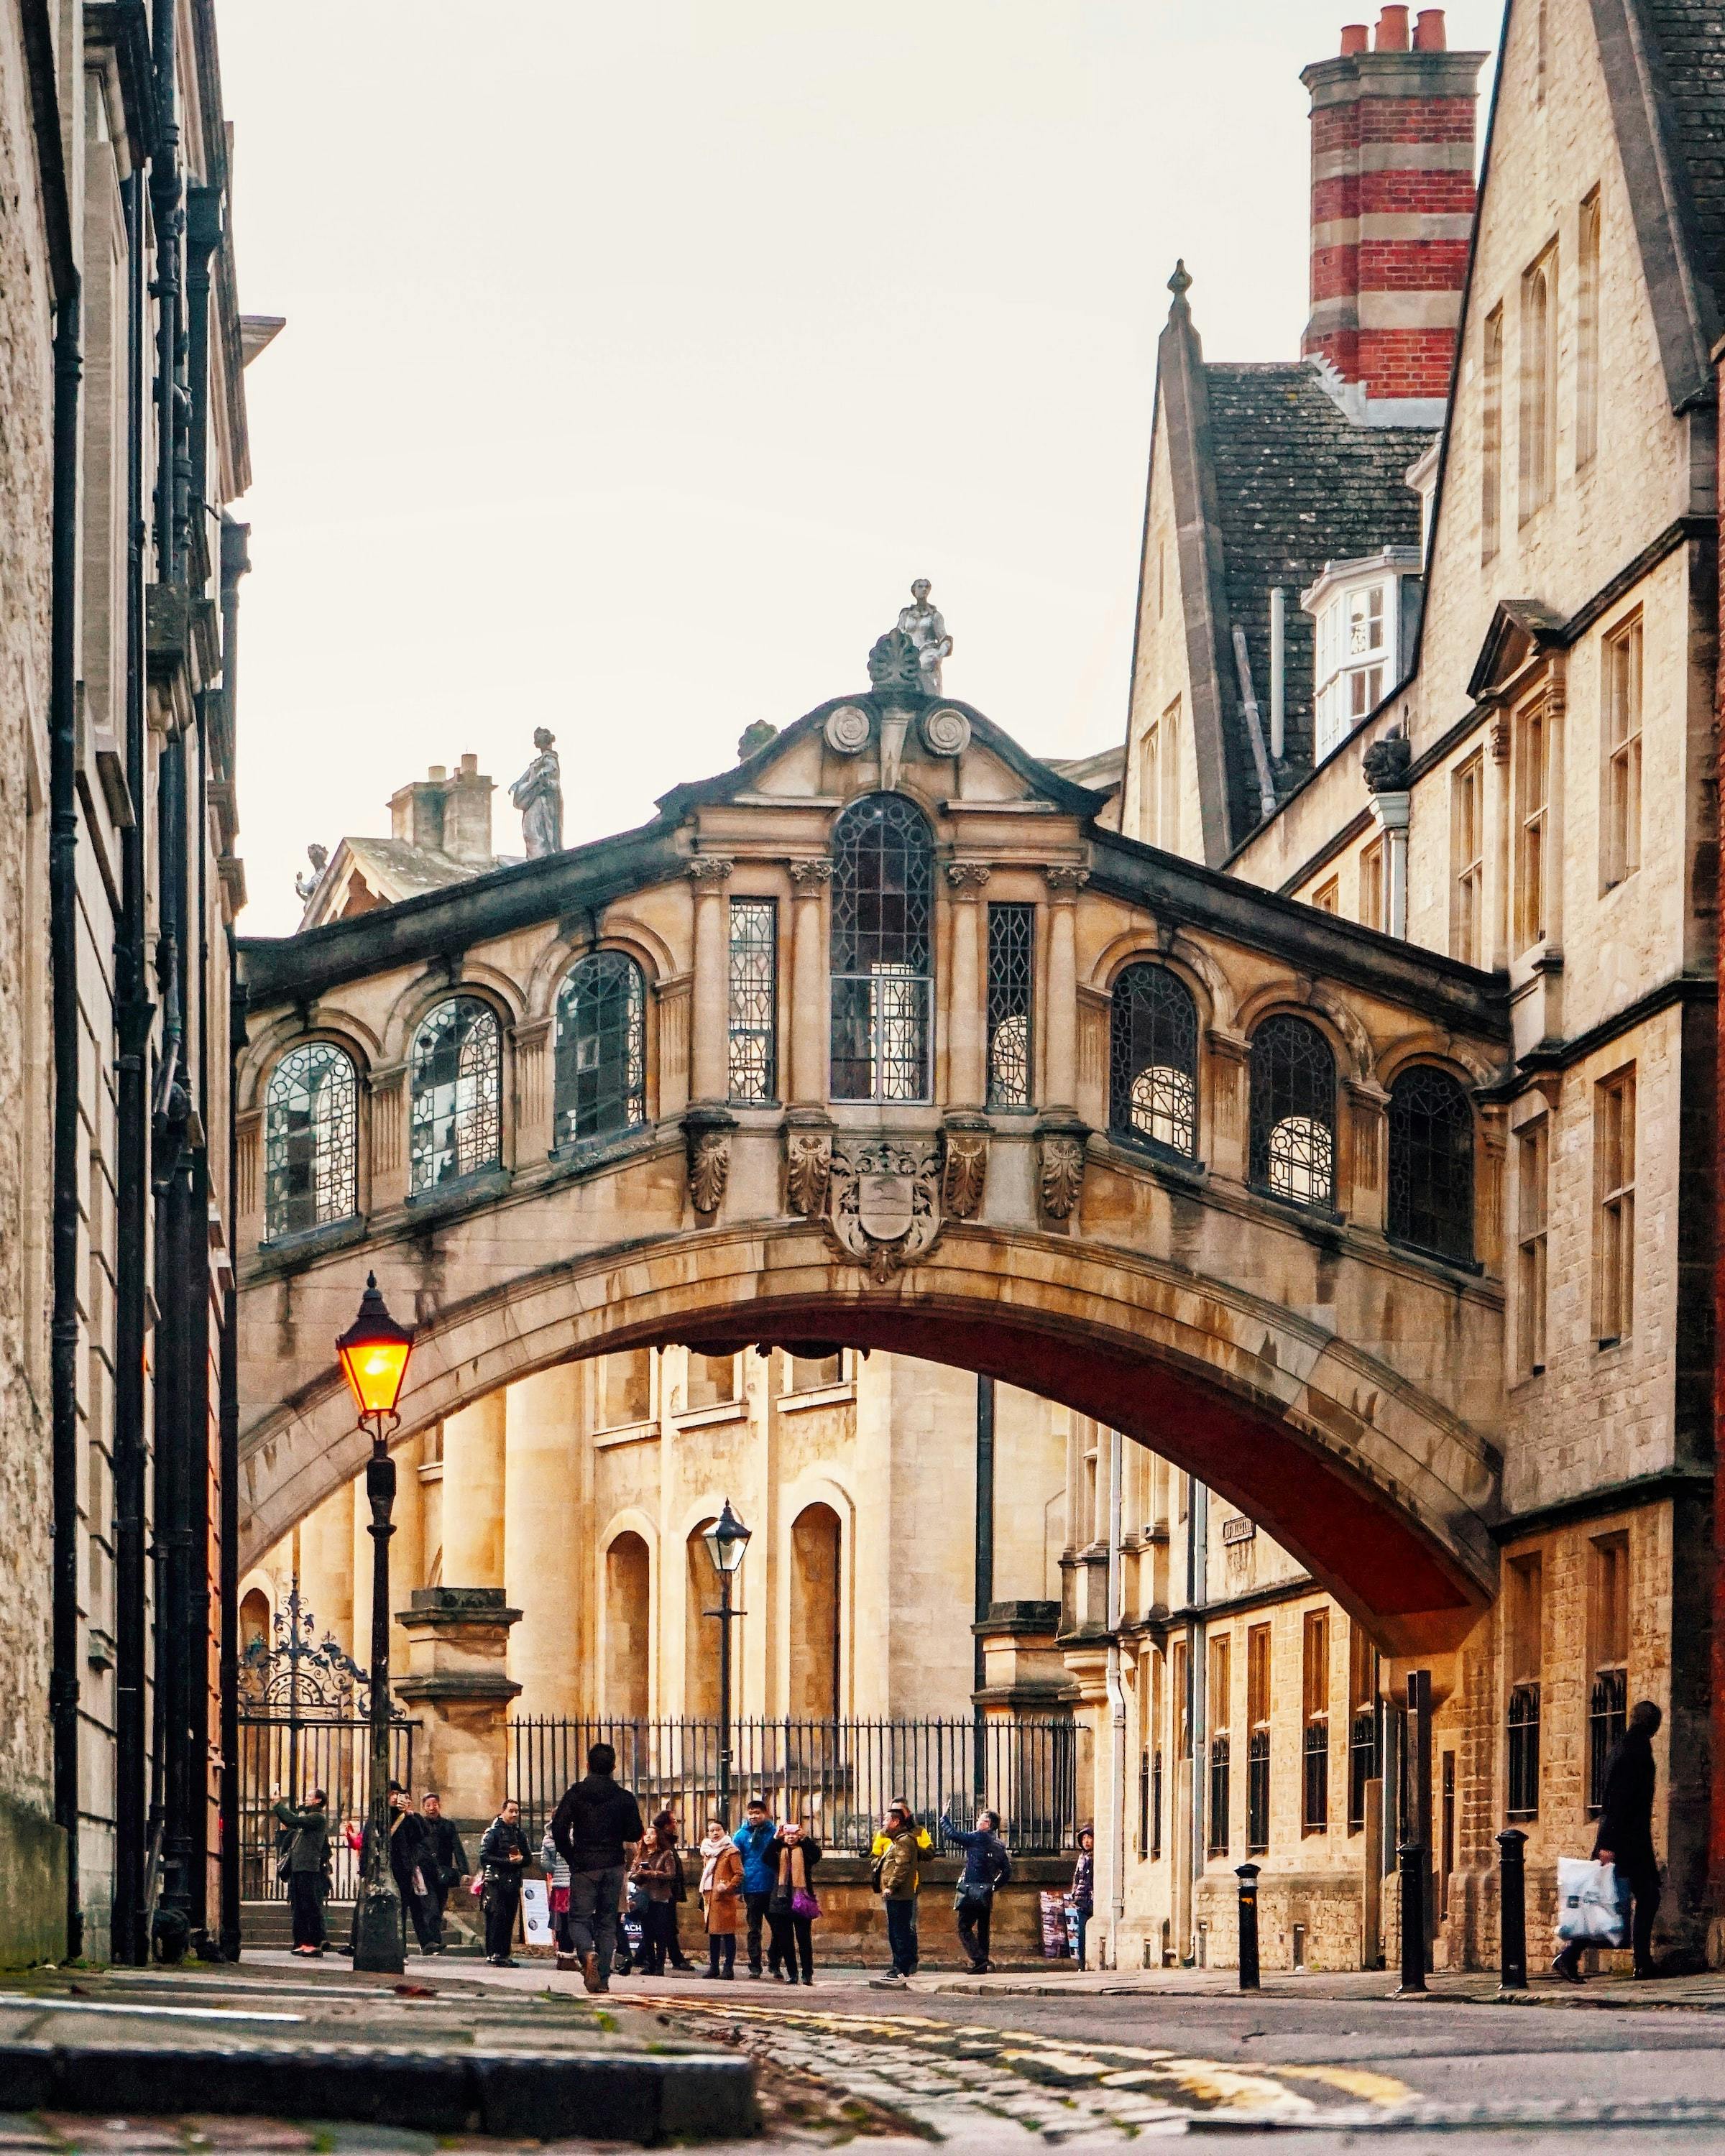 Where is the safest place to live in Oxford?